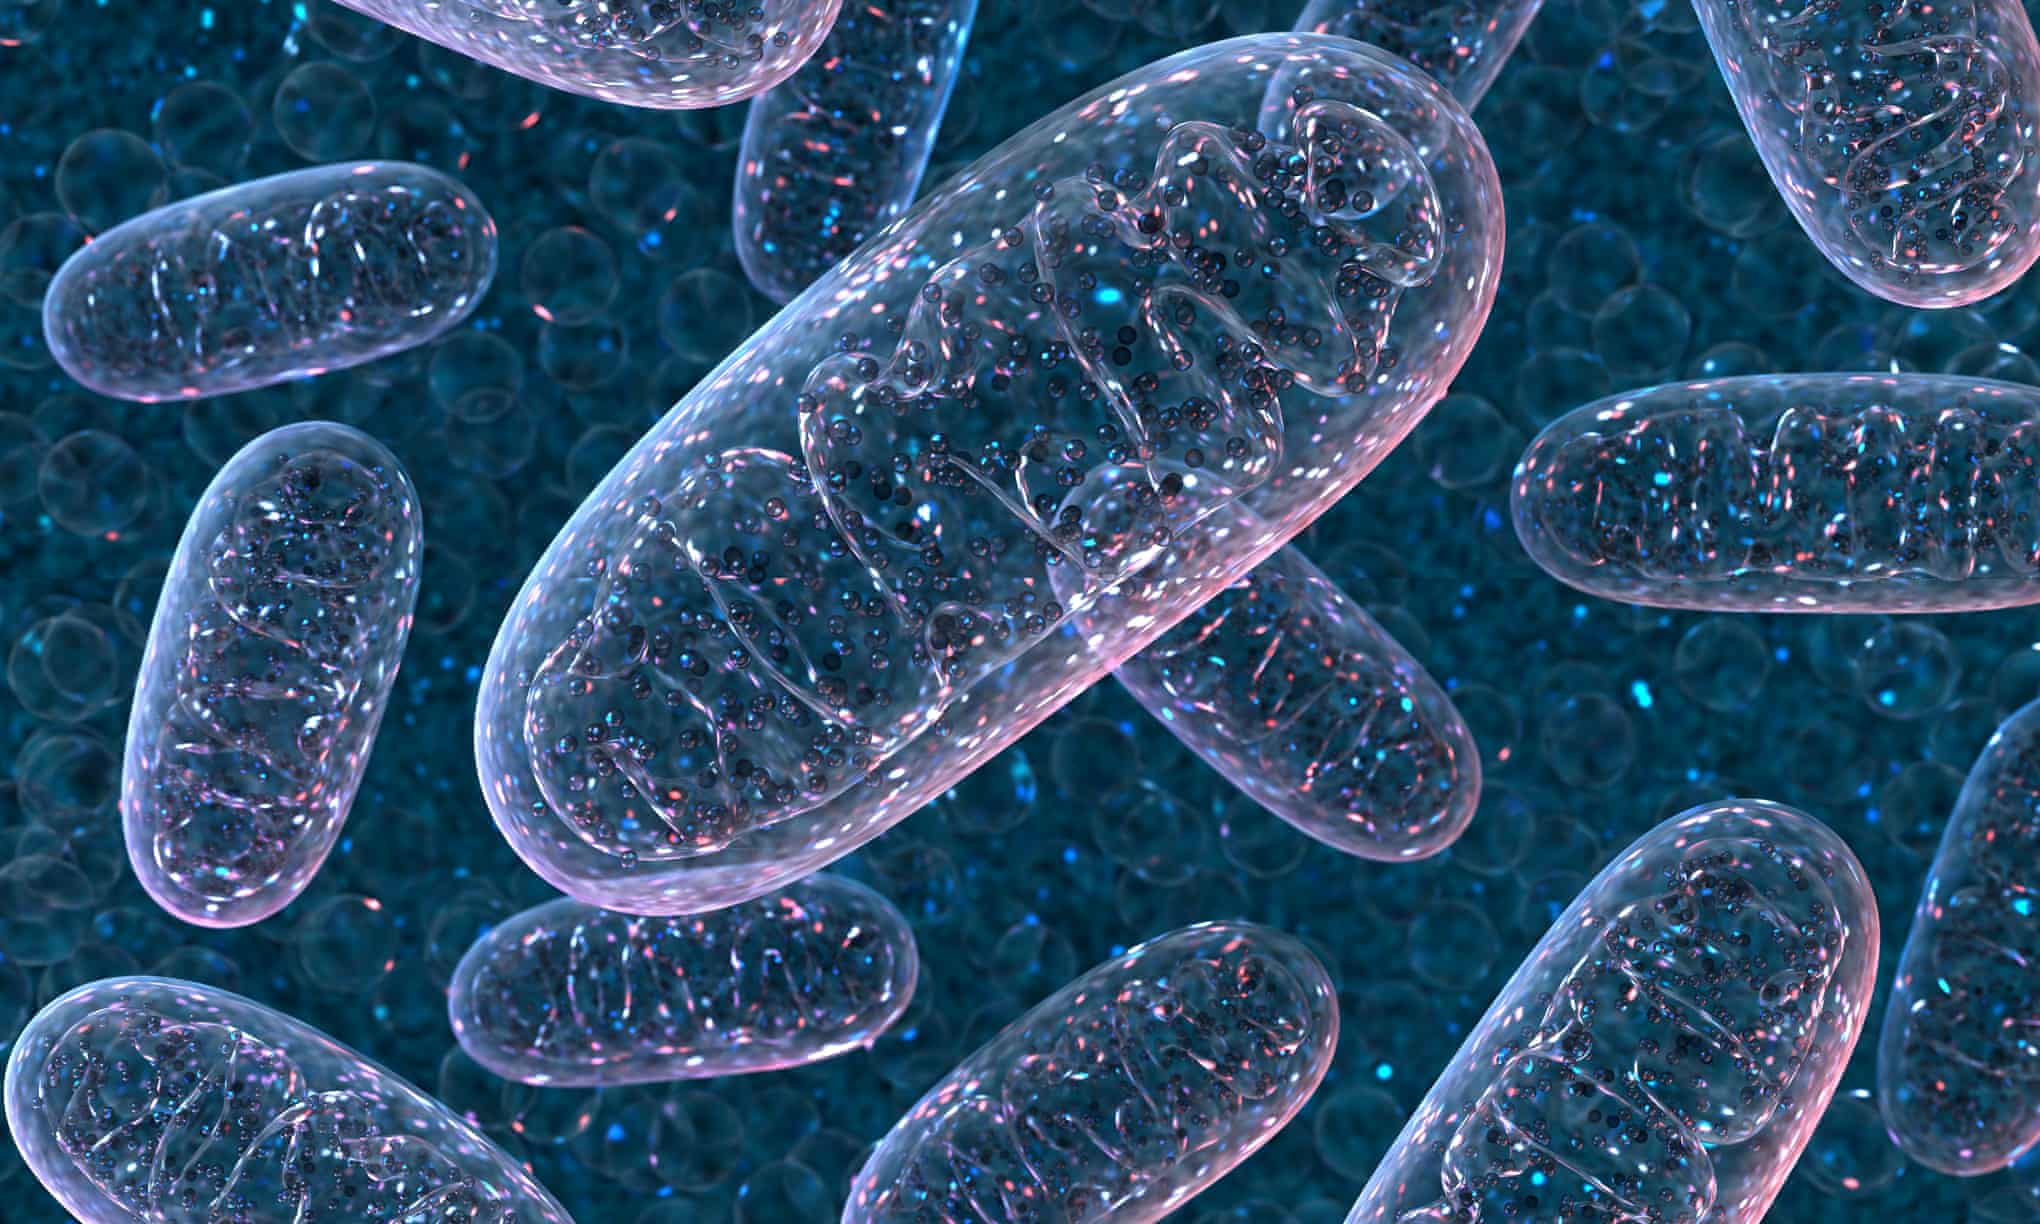 Scientists look to body’s mitochondria as possible key to beating long COVID (theguardian.com)